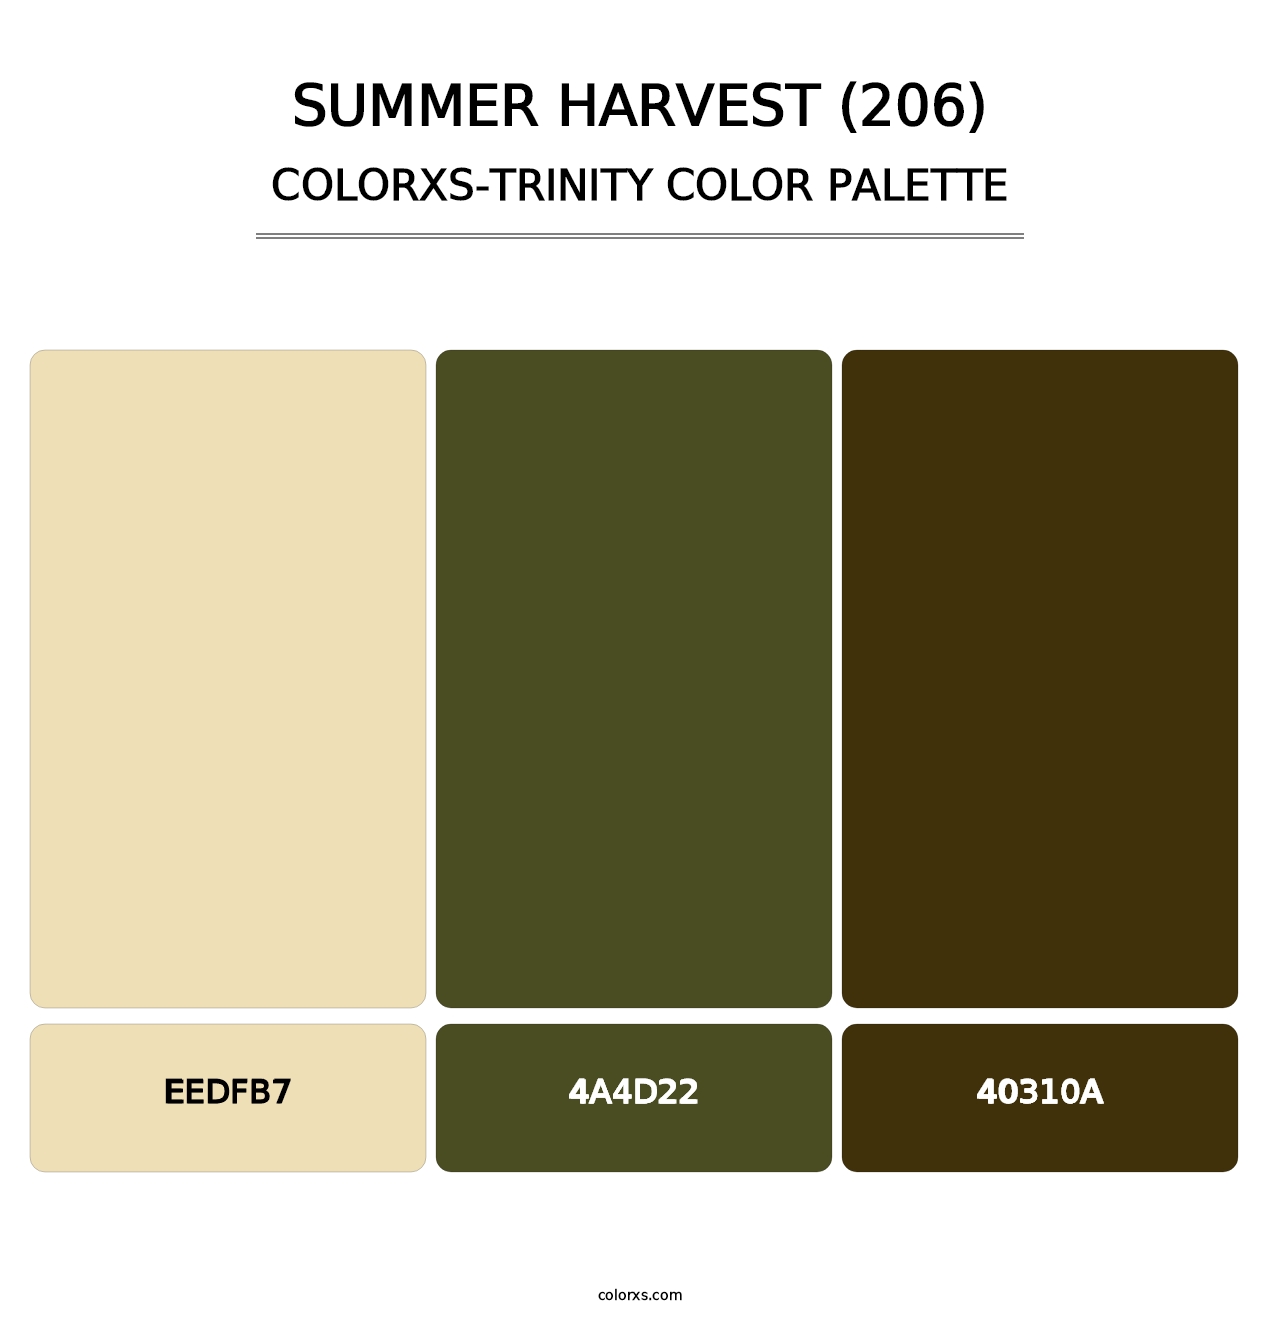 Summer Harvest (206) - Colorxs Trinity Palette